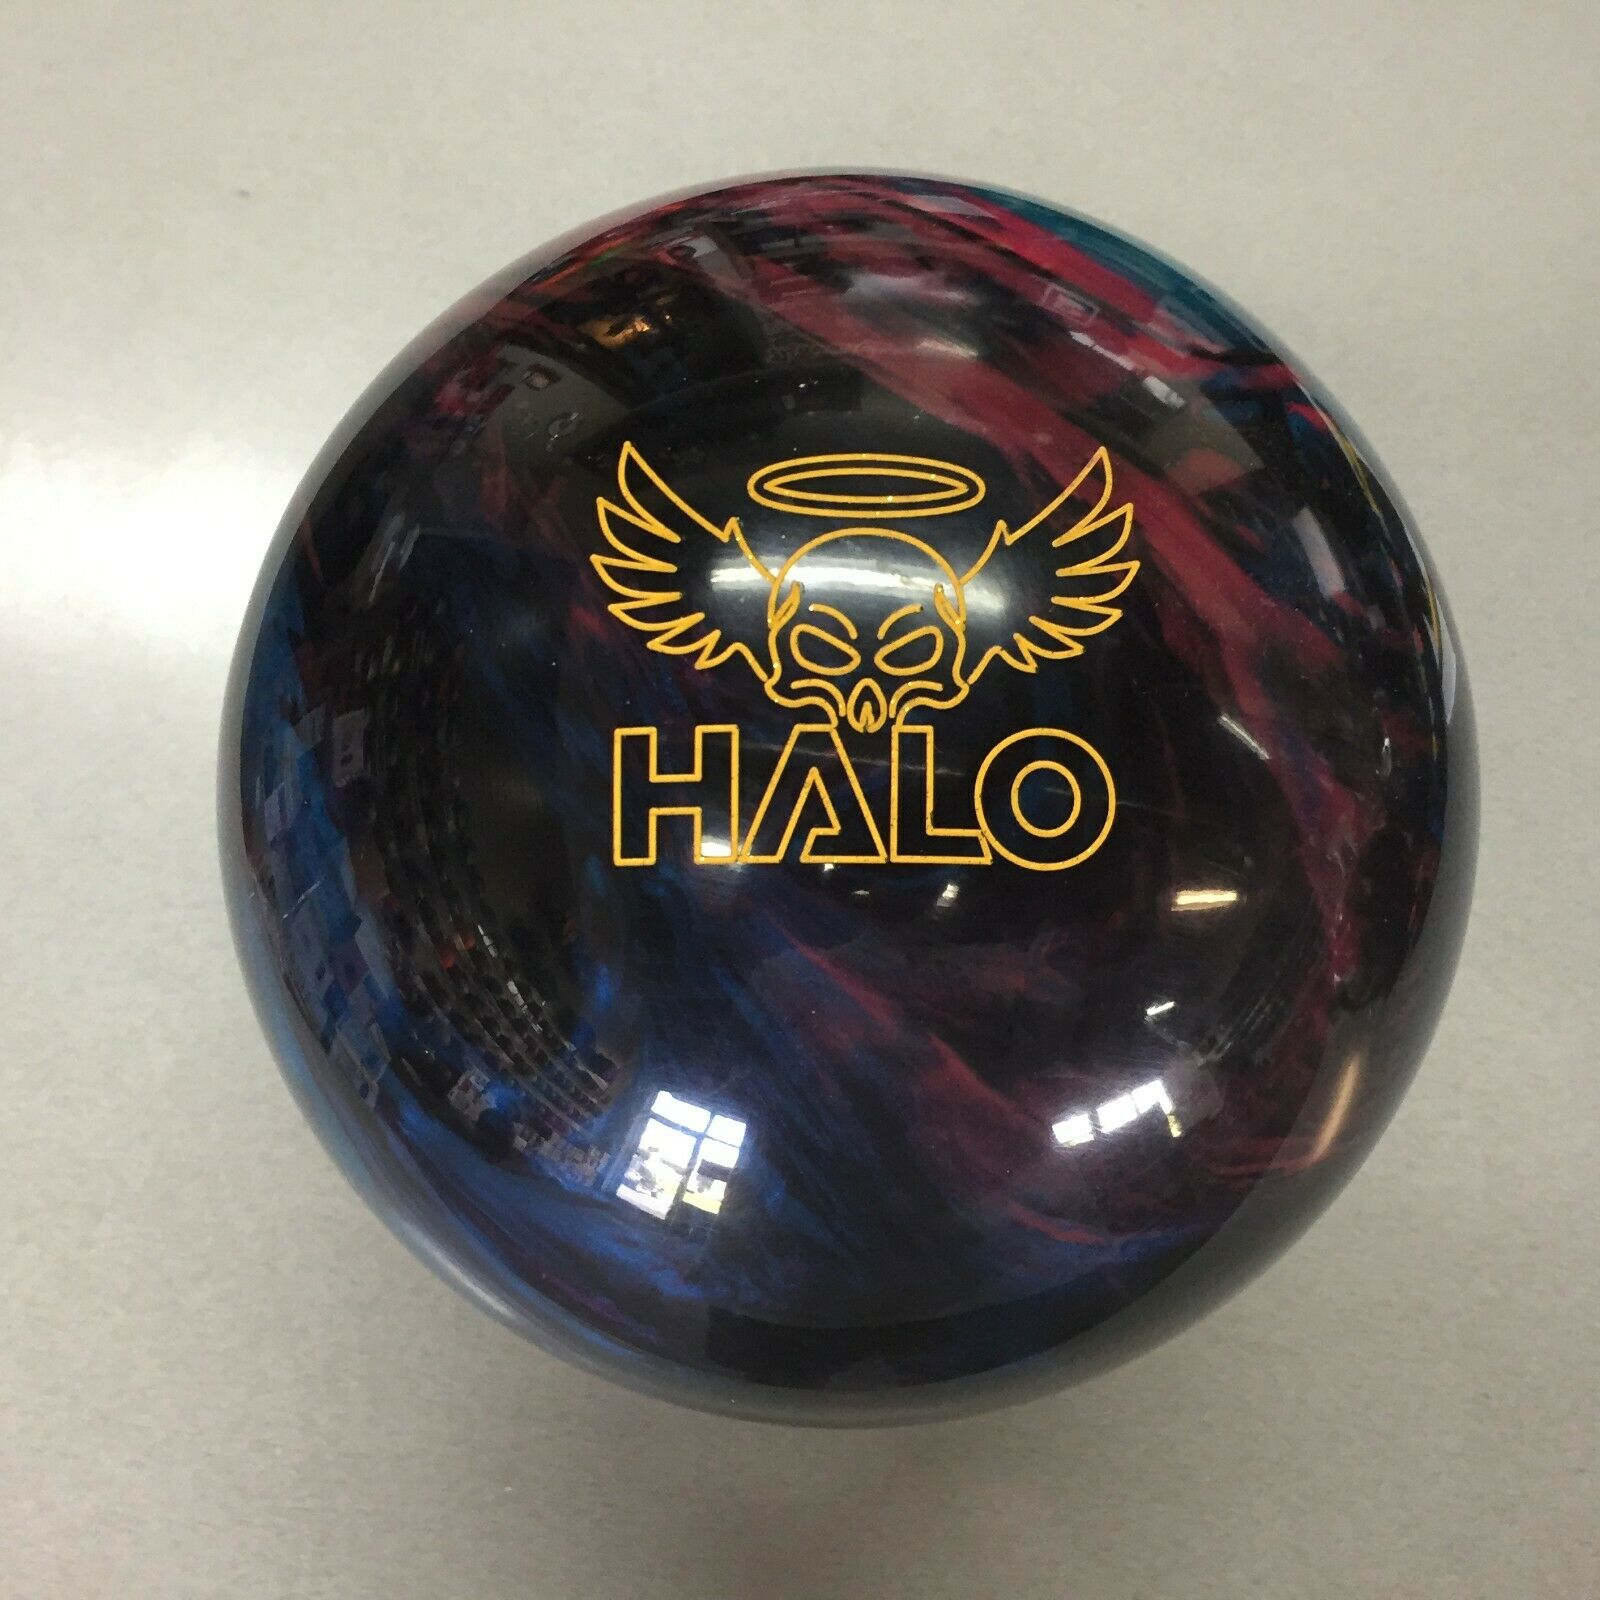 Roto Grip Halo Pearl  1st Quality   Bowling  Ball  15   Lb.   New In Box!   #006